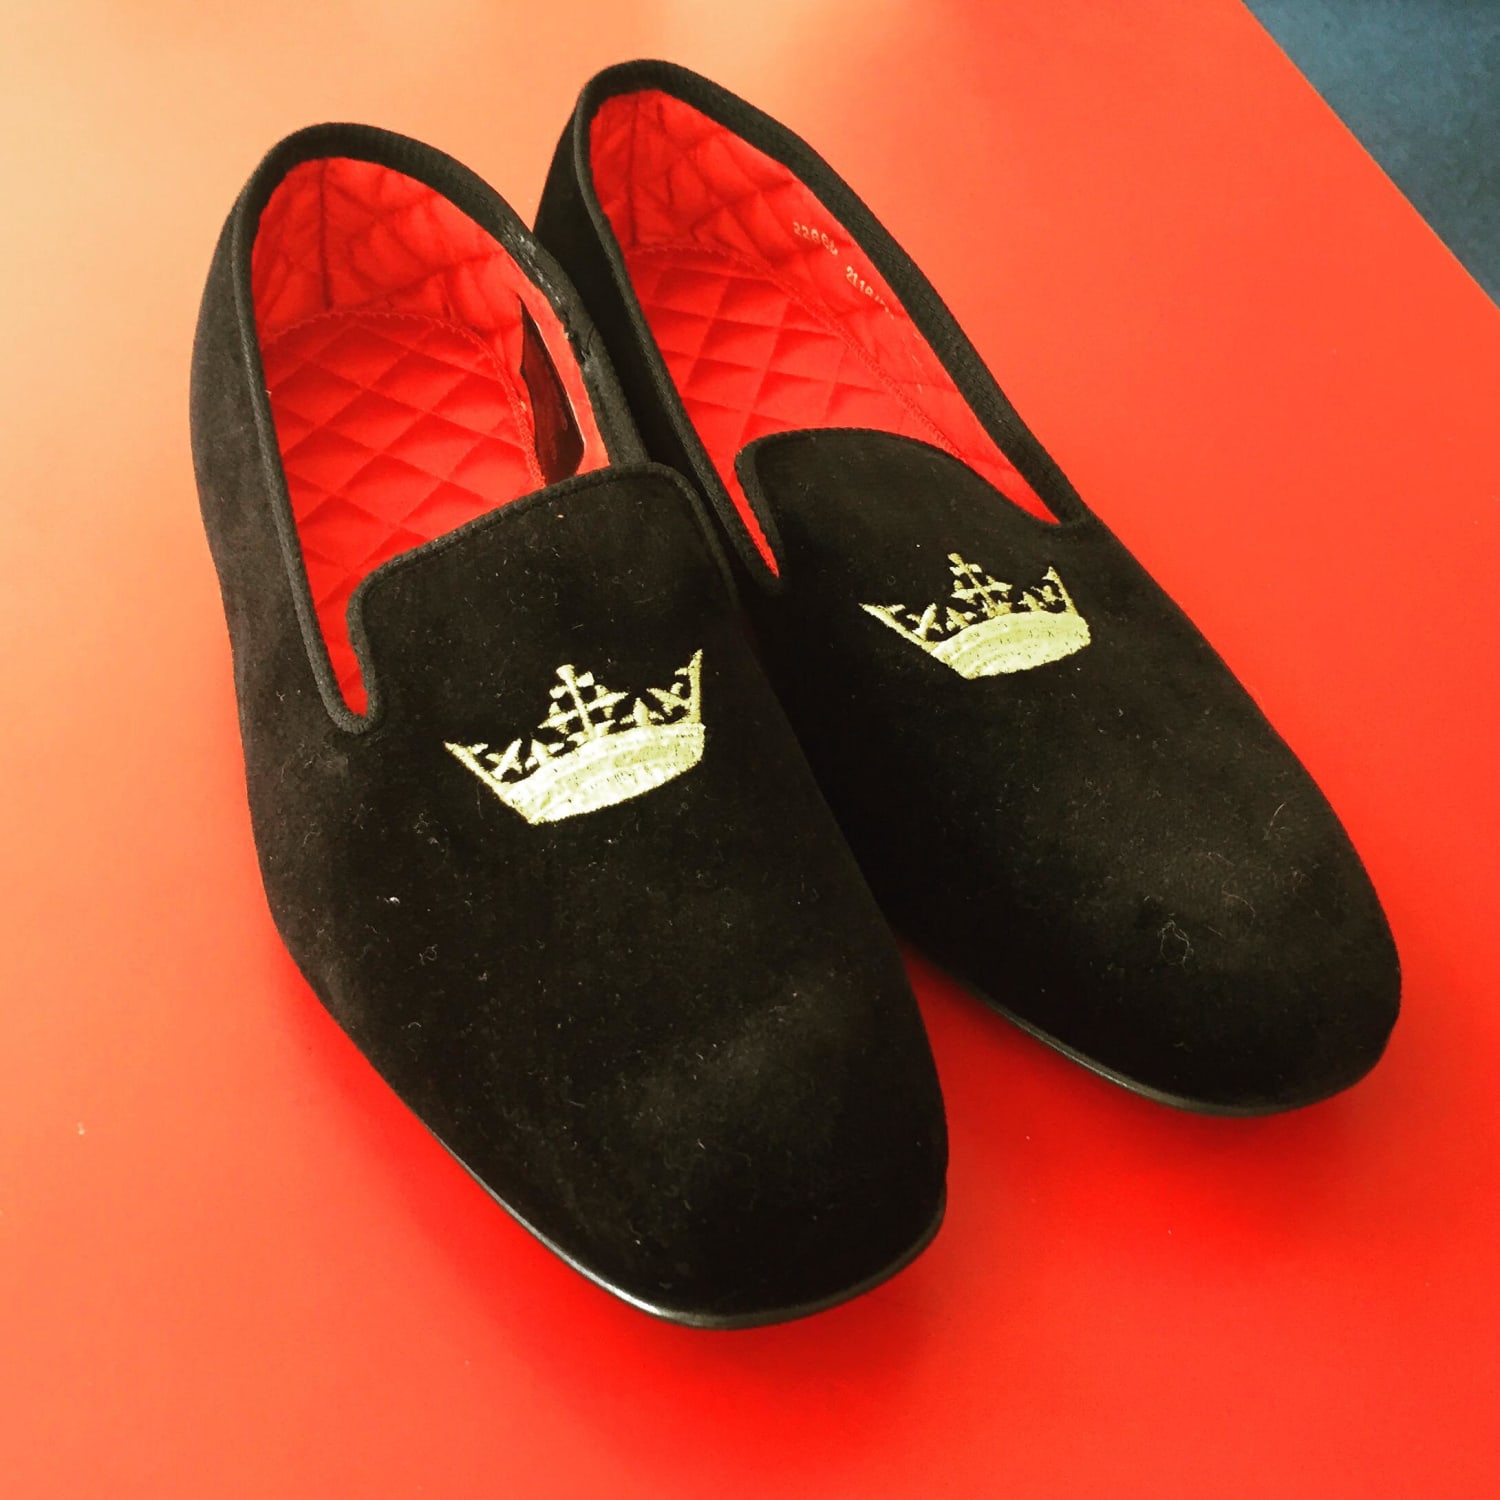 HELP ME FIND BERT COOPER'S SLIPPERS: When Mad Men's props auction happened awhile back I paid $500 for Bert Cooper's production worn slippers. Now I'm trying to figure out WHERE in the series he wore these velvet masterpieces from Brooks Brothers. If you see them in a rewatch, let me know.